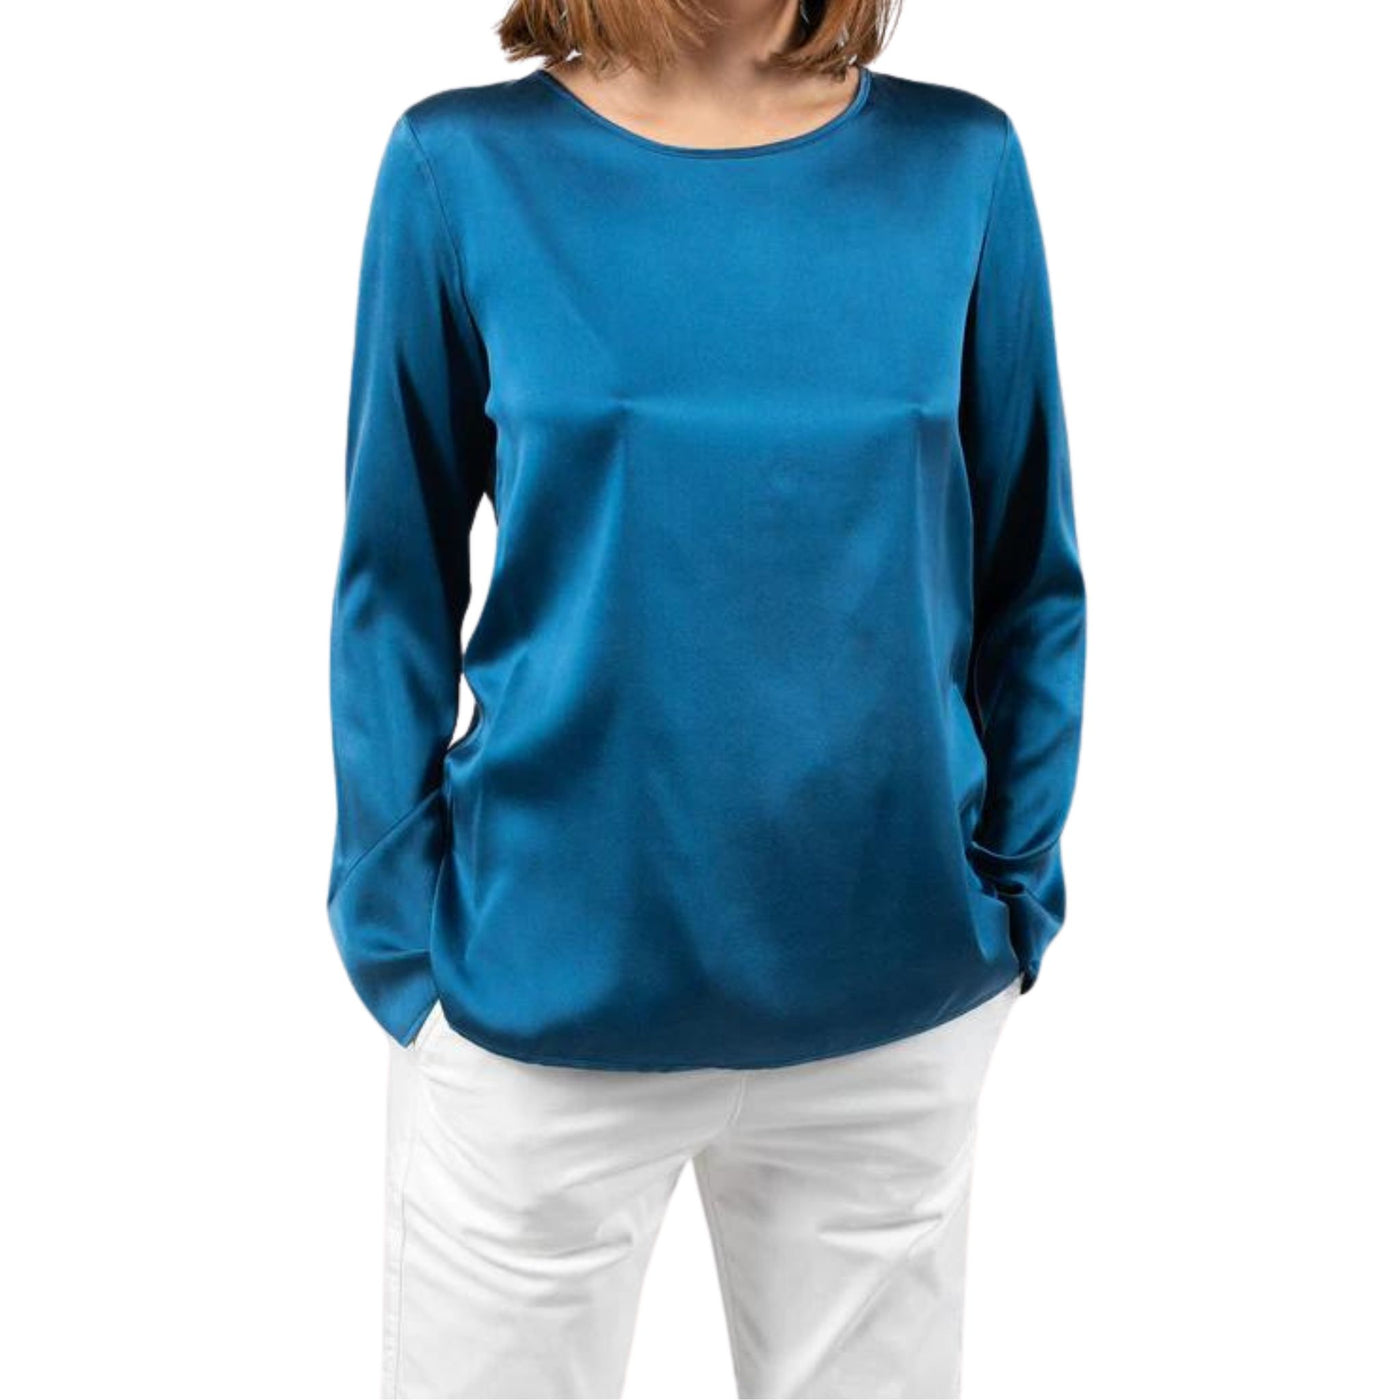 Women's blouse with long sleeves